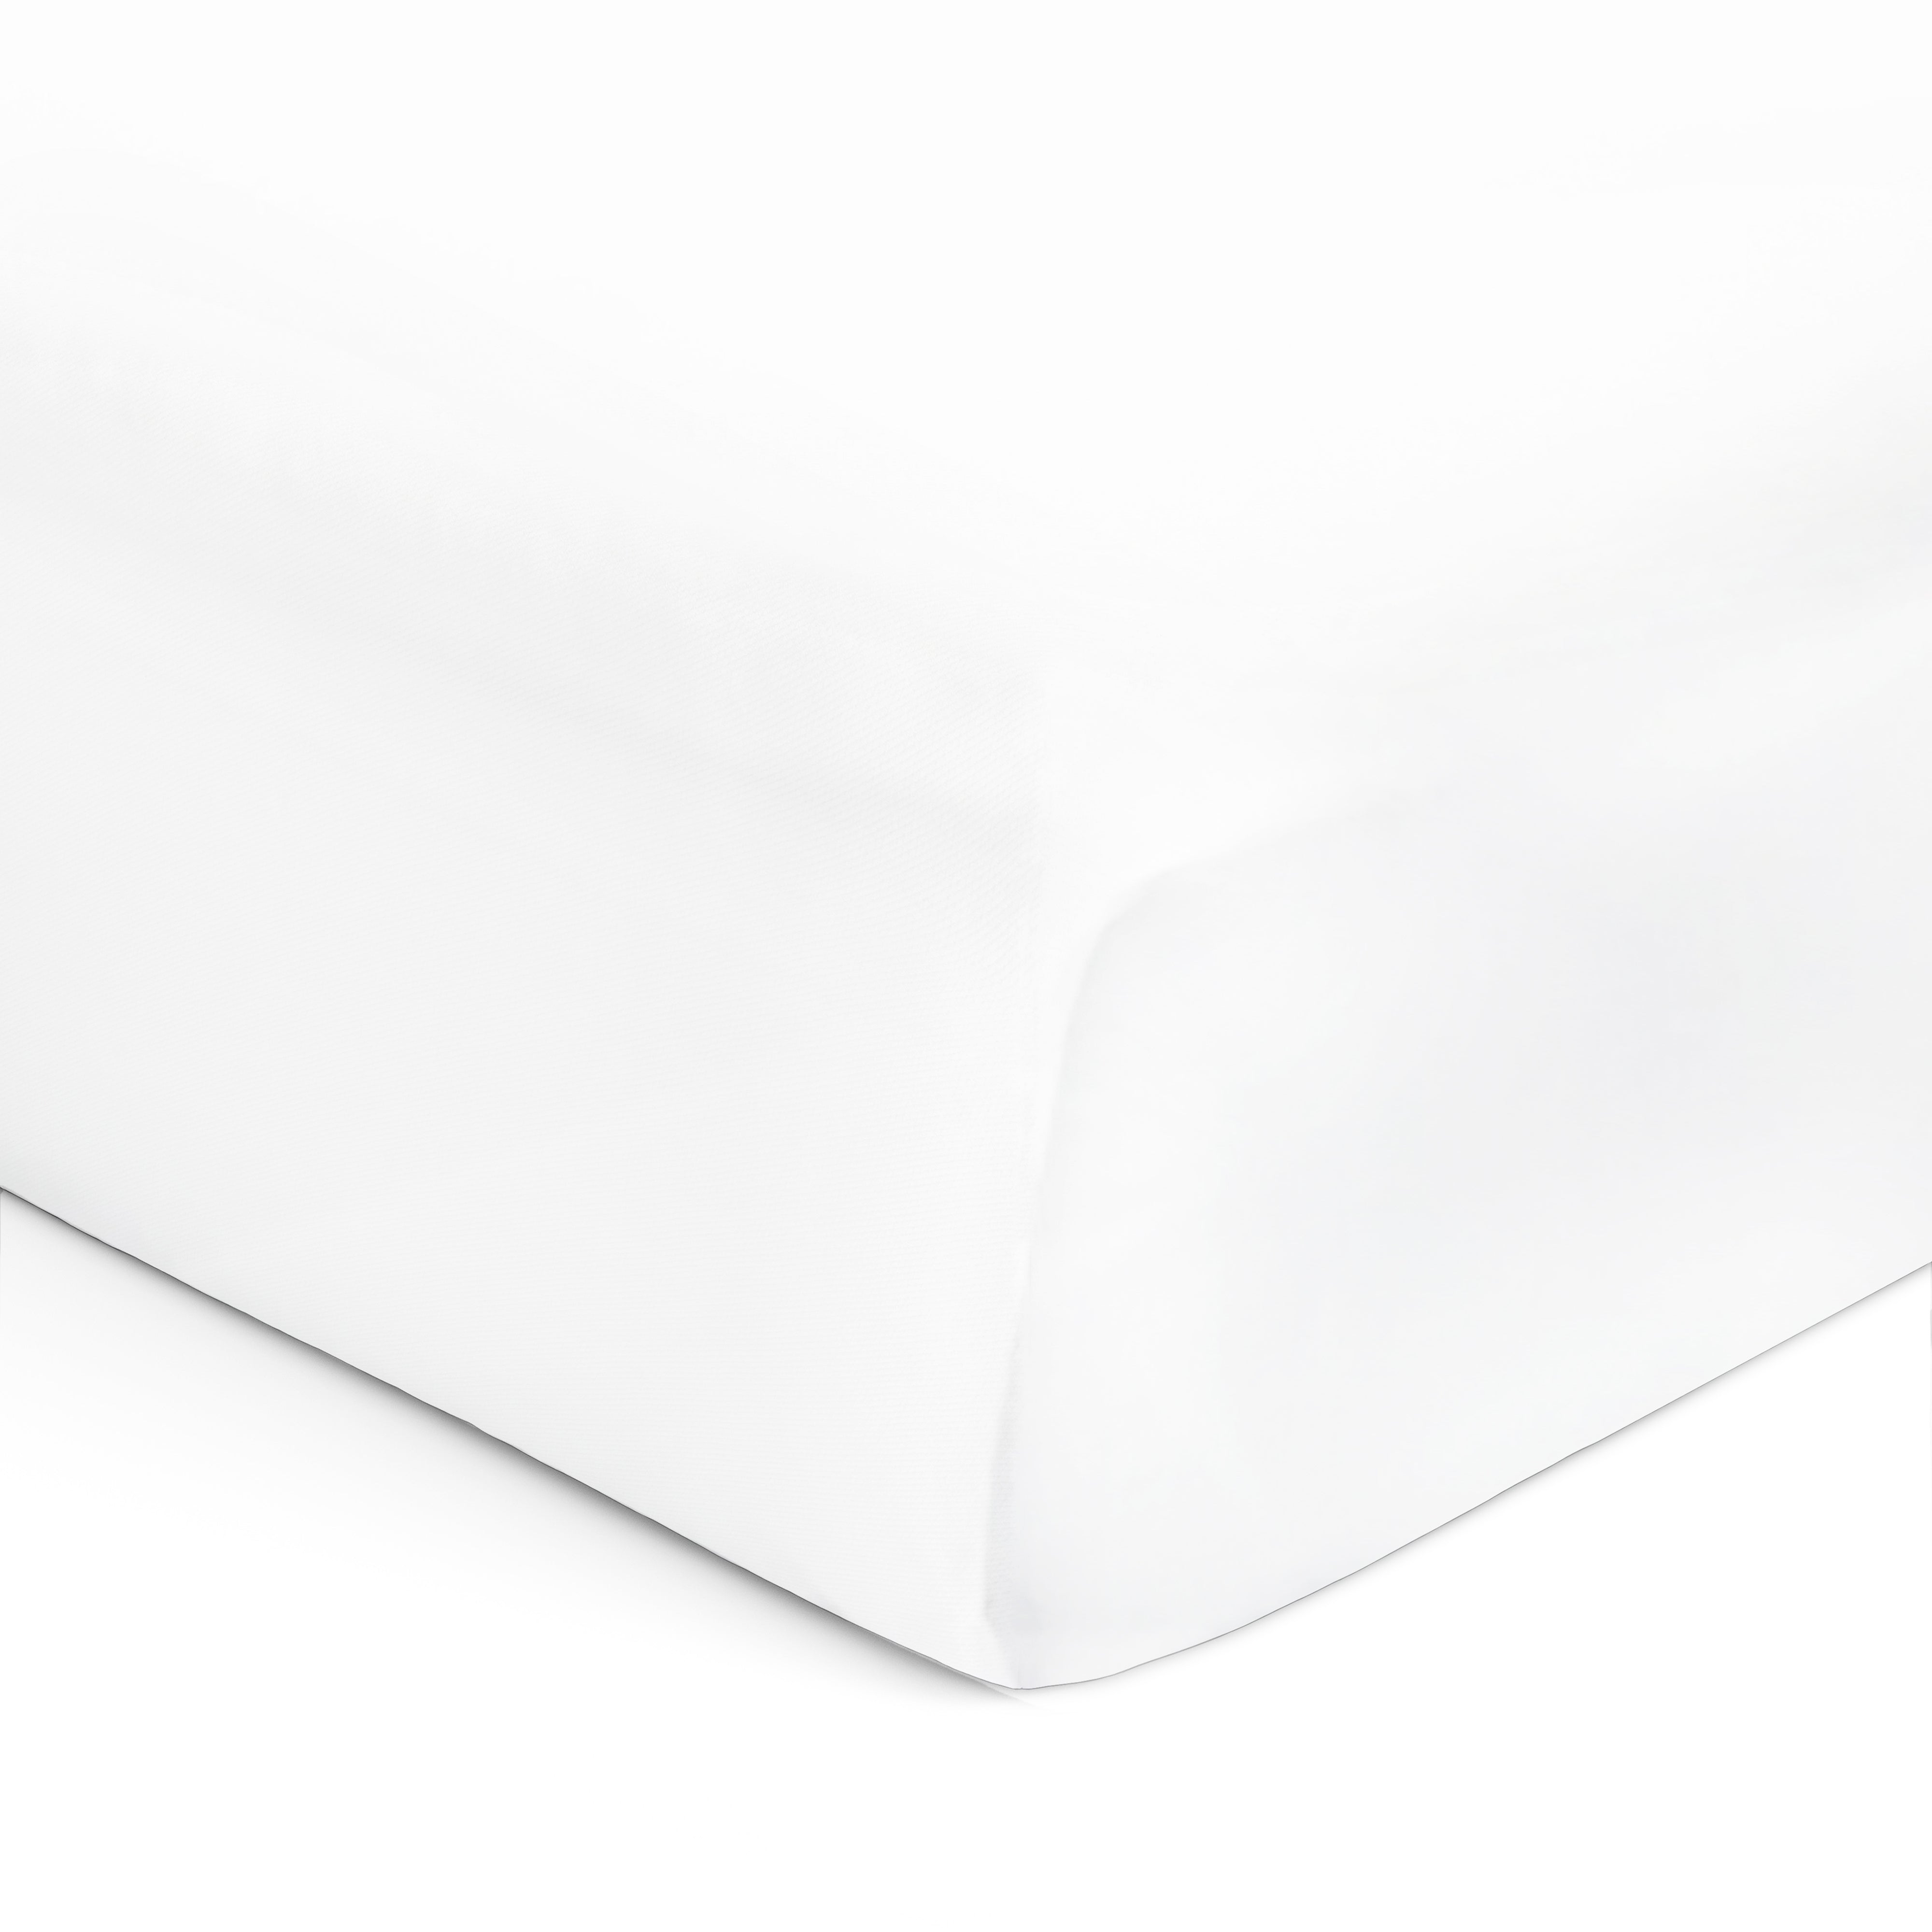 The White Cradle Pure Organic Cotton Flat Sheet for Baby Crib & Cot With Size 71 x 47 inch - Super Soft, Smooth, Absorbent, Twill Fabric for Infants, Newborns, Babies, Toddlers - White